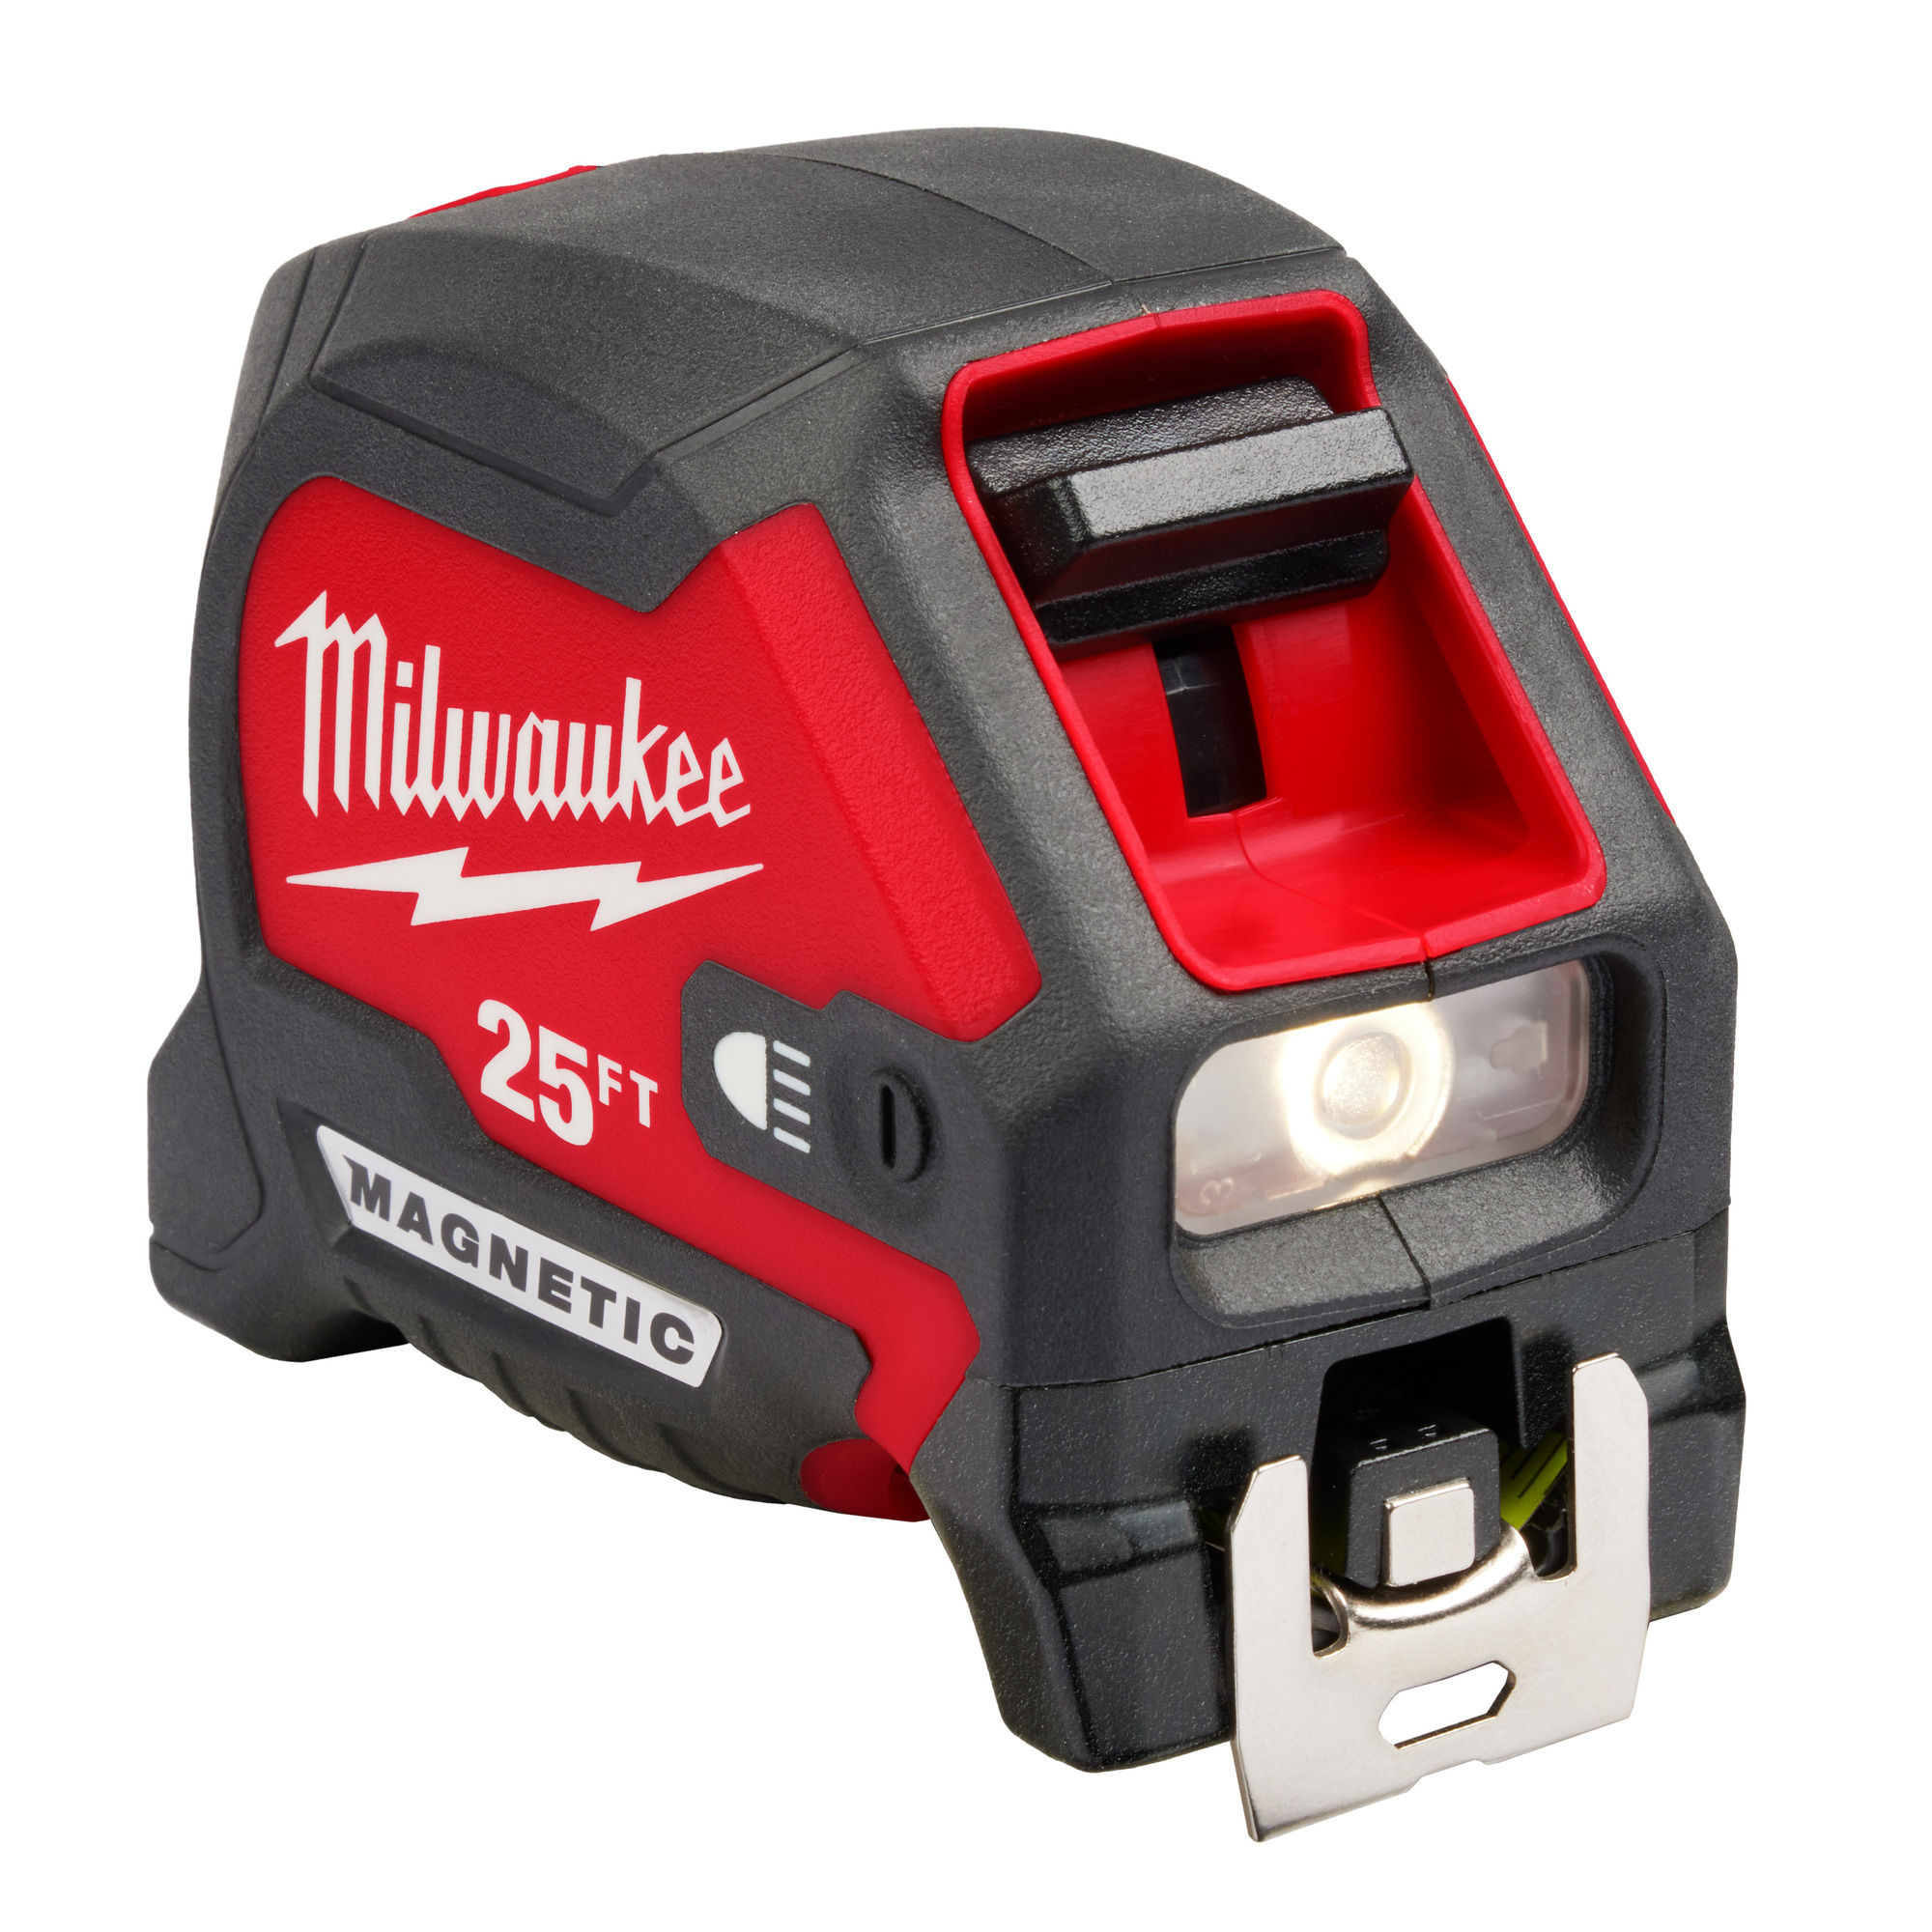 Milwaukee, 25ft. Magnetic Tape Measure w/Light, Length 25 ft, Measures up to 25 ft, Model 48-22-0428